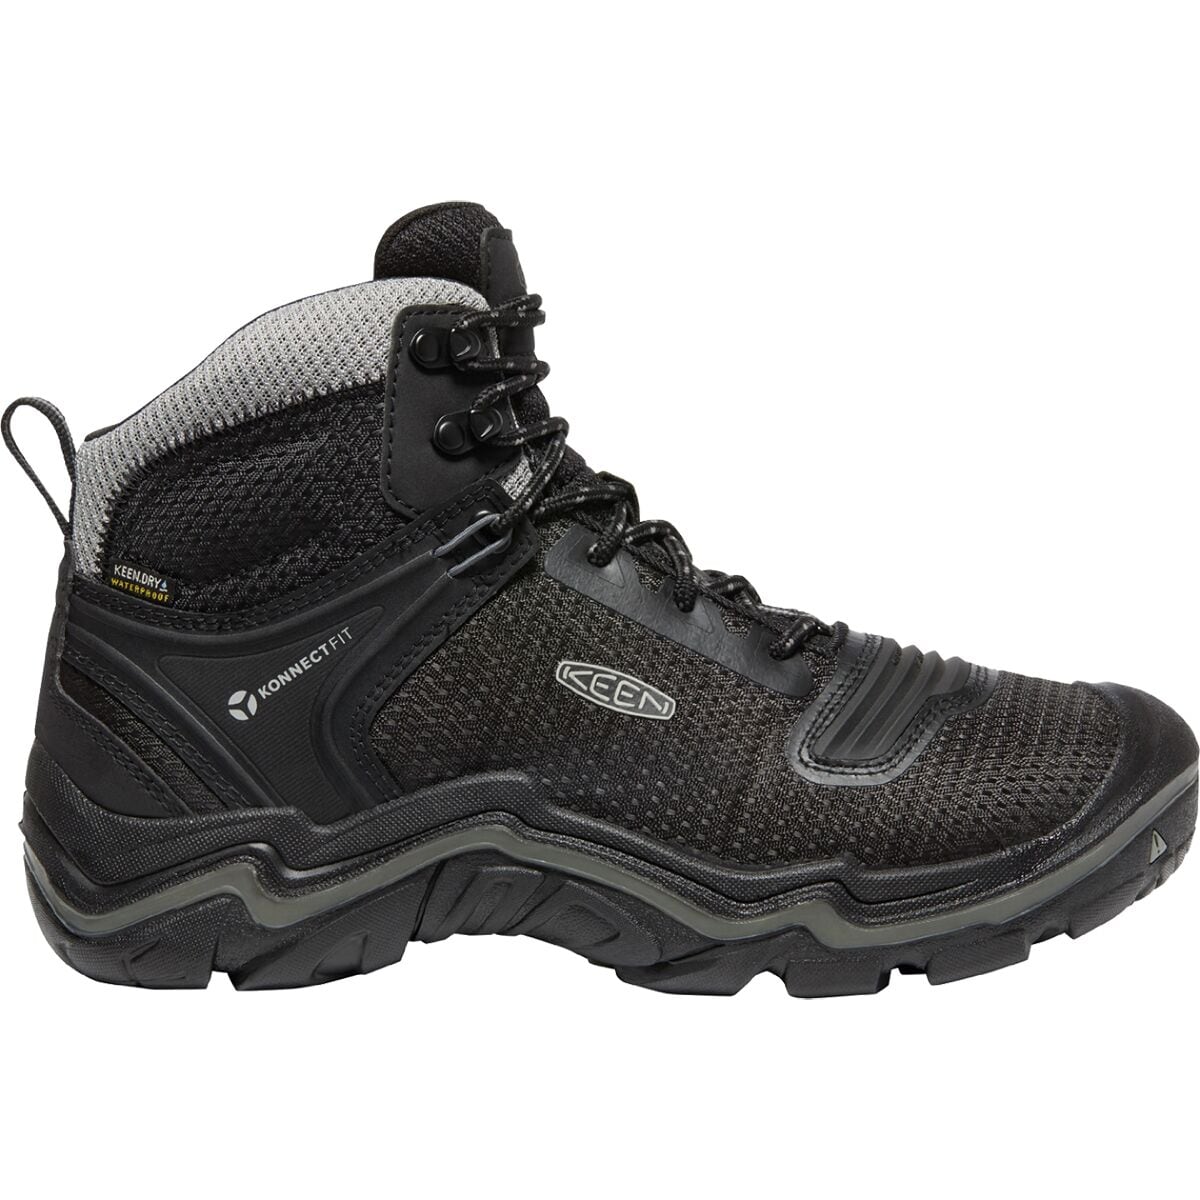 KEEN hiking boots and shoes: how good are they? - www.hikingfeet.com